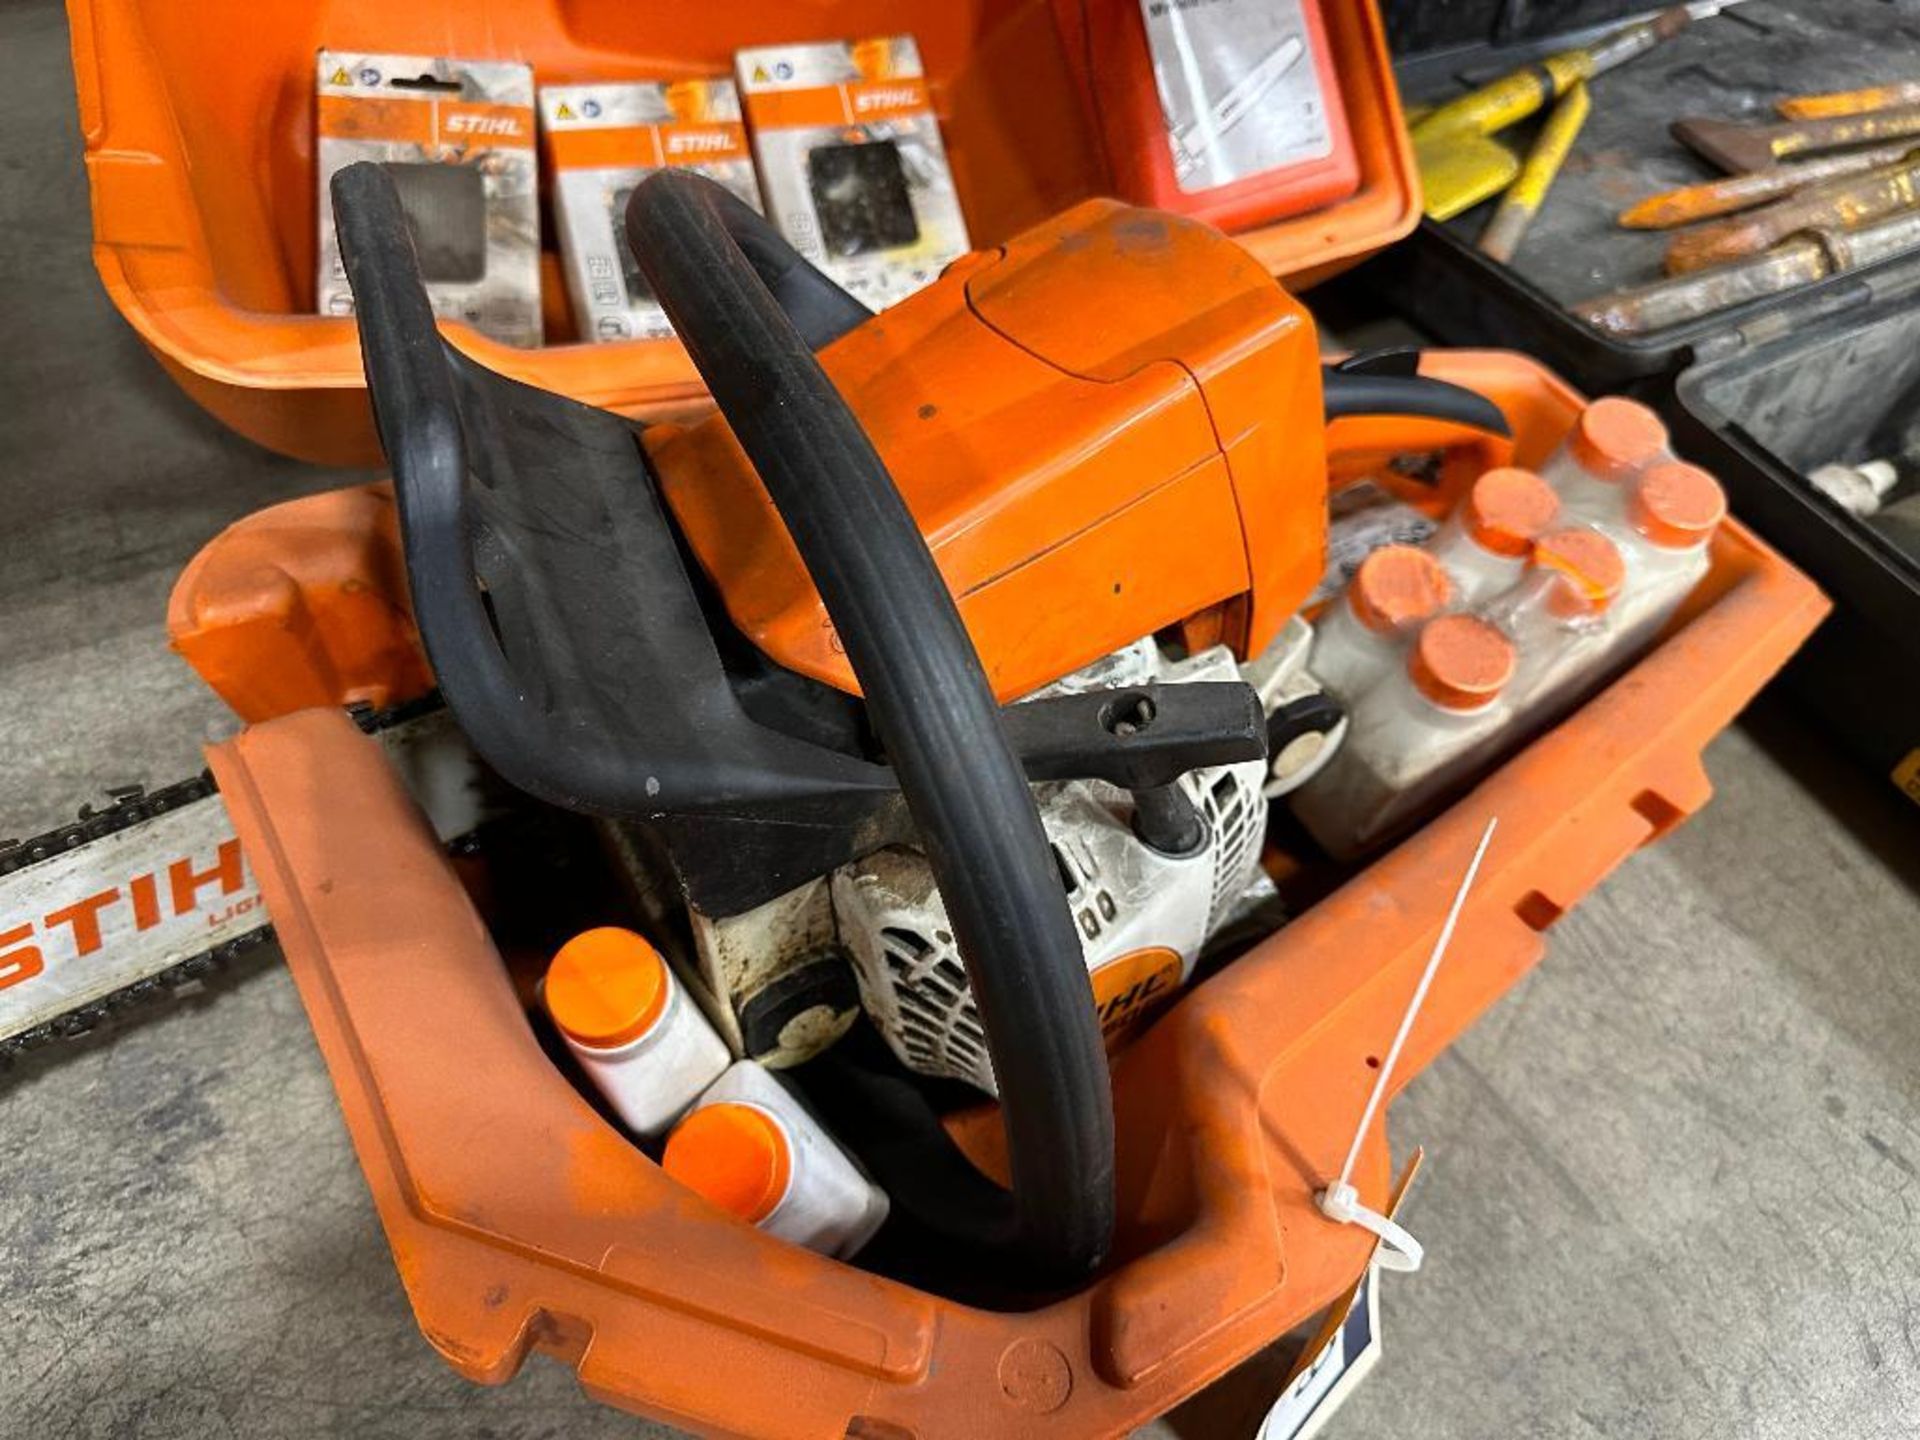 Stihl MS 250C Gas Chainsaw w/ Asst. Chain Oil, (3) Chains, Engine Oil, etc. - Image 5 of 9